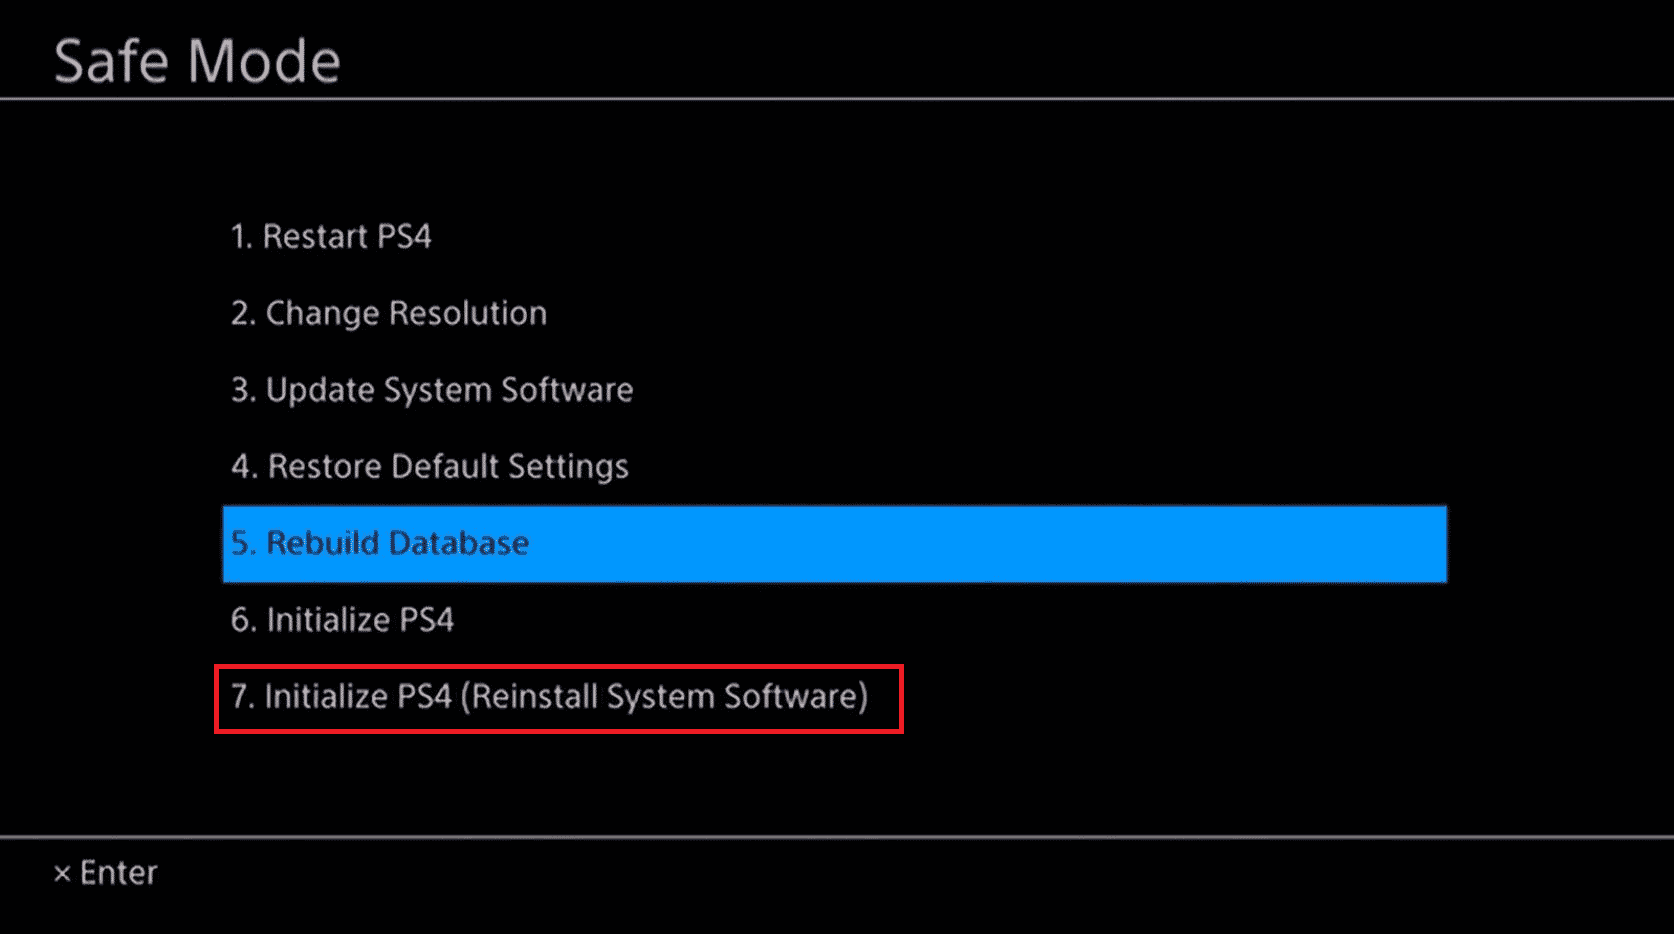 Initialize PS4 reinstall system software PS4 safe mode